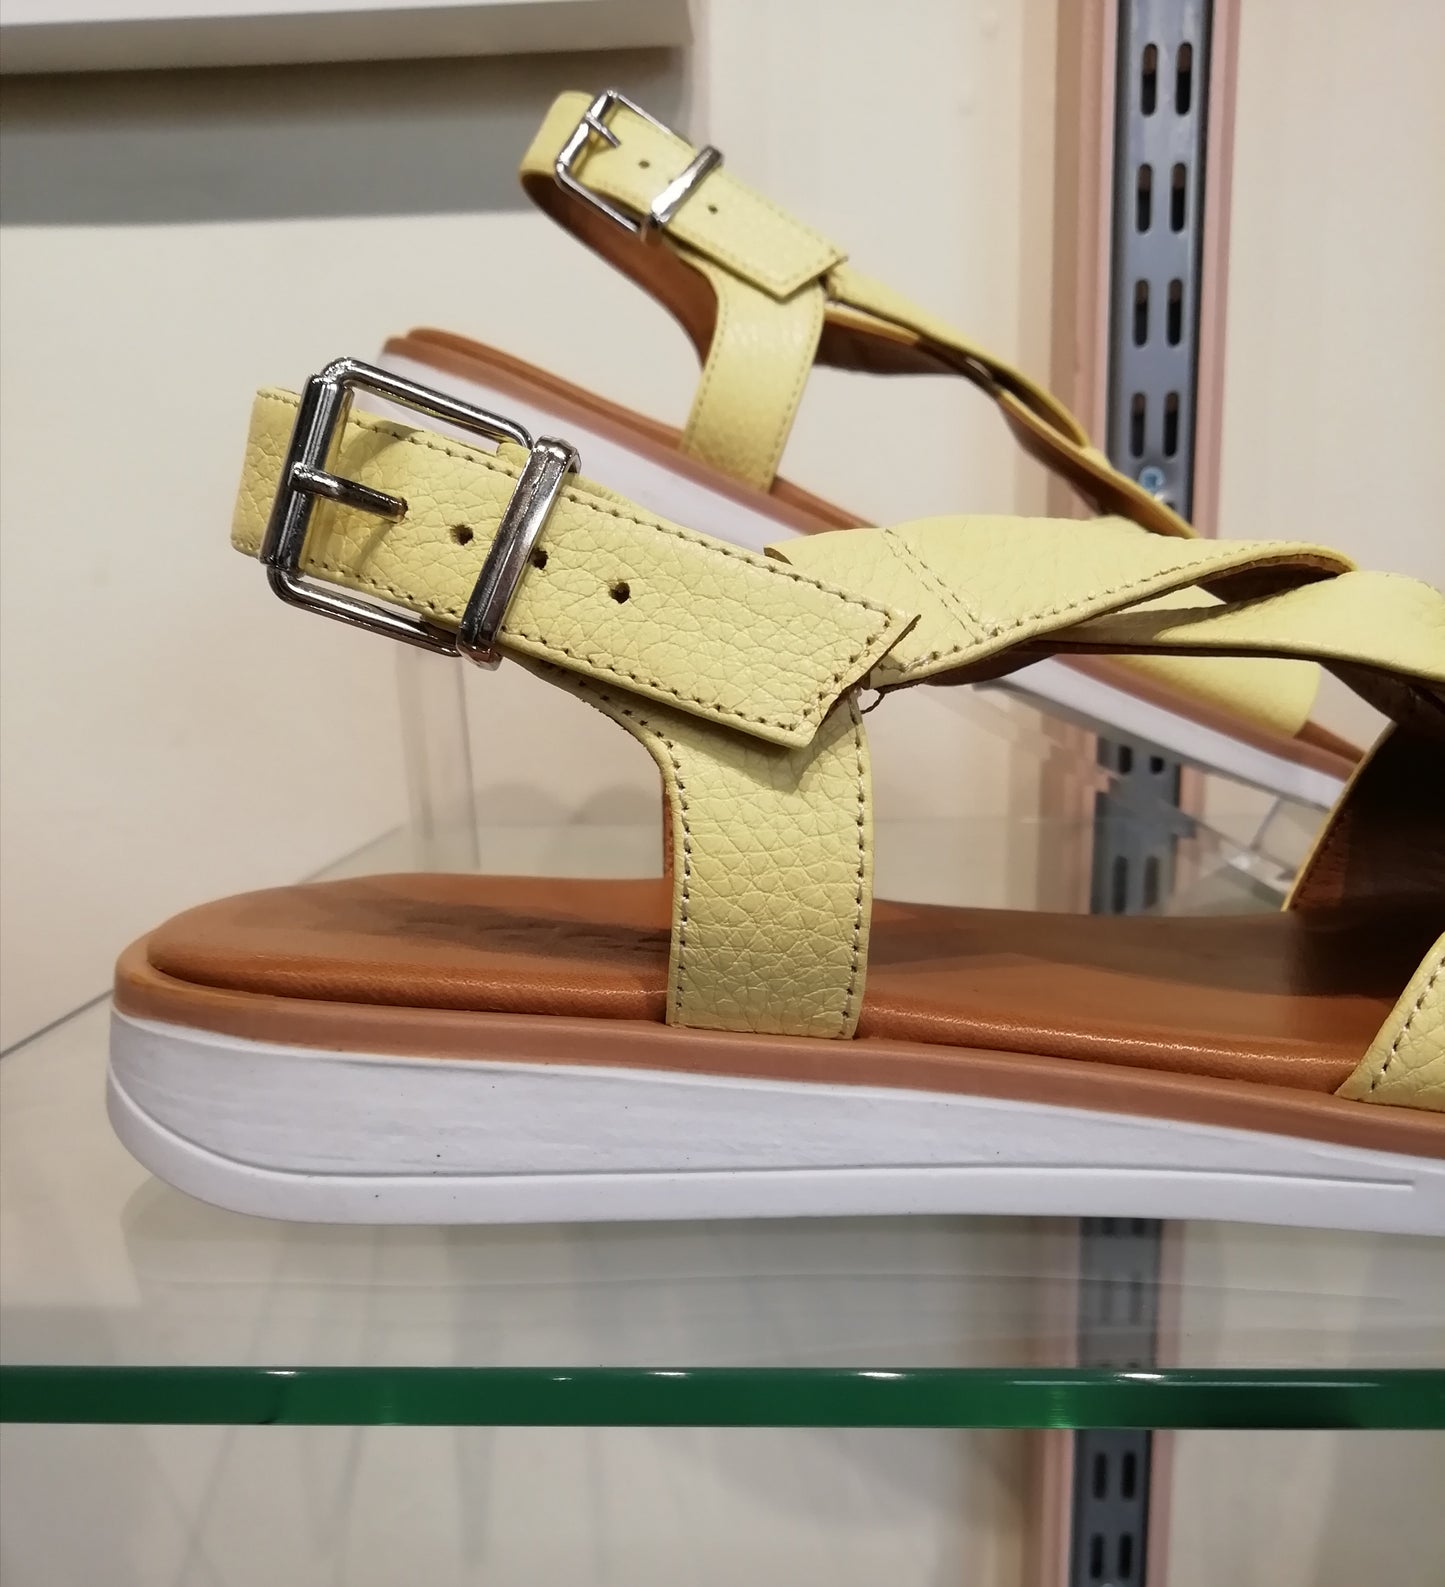 Adesso Daisy Lemon Leather Sandal with buckle. Only size 8 left